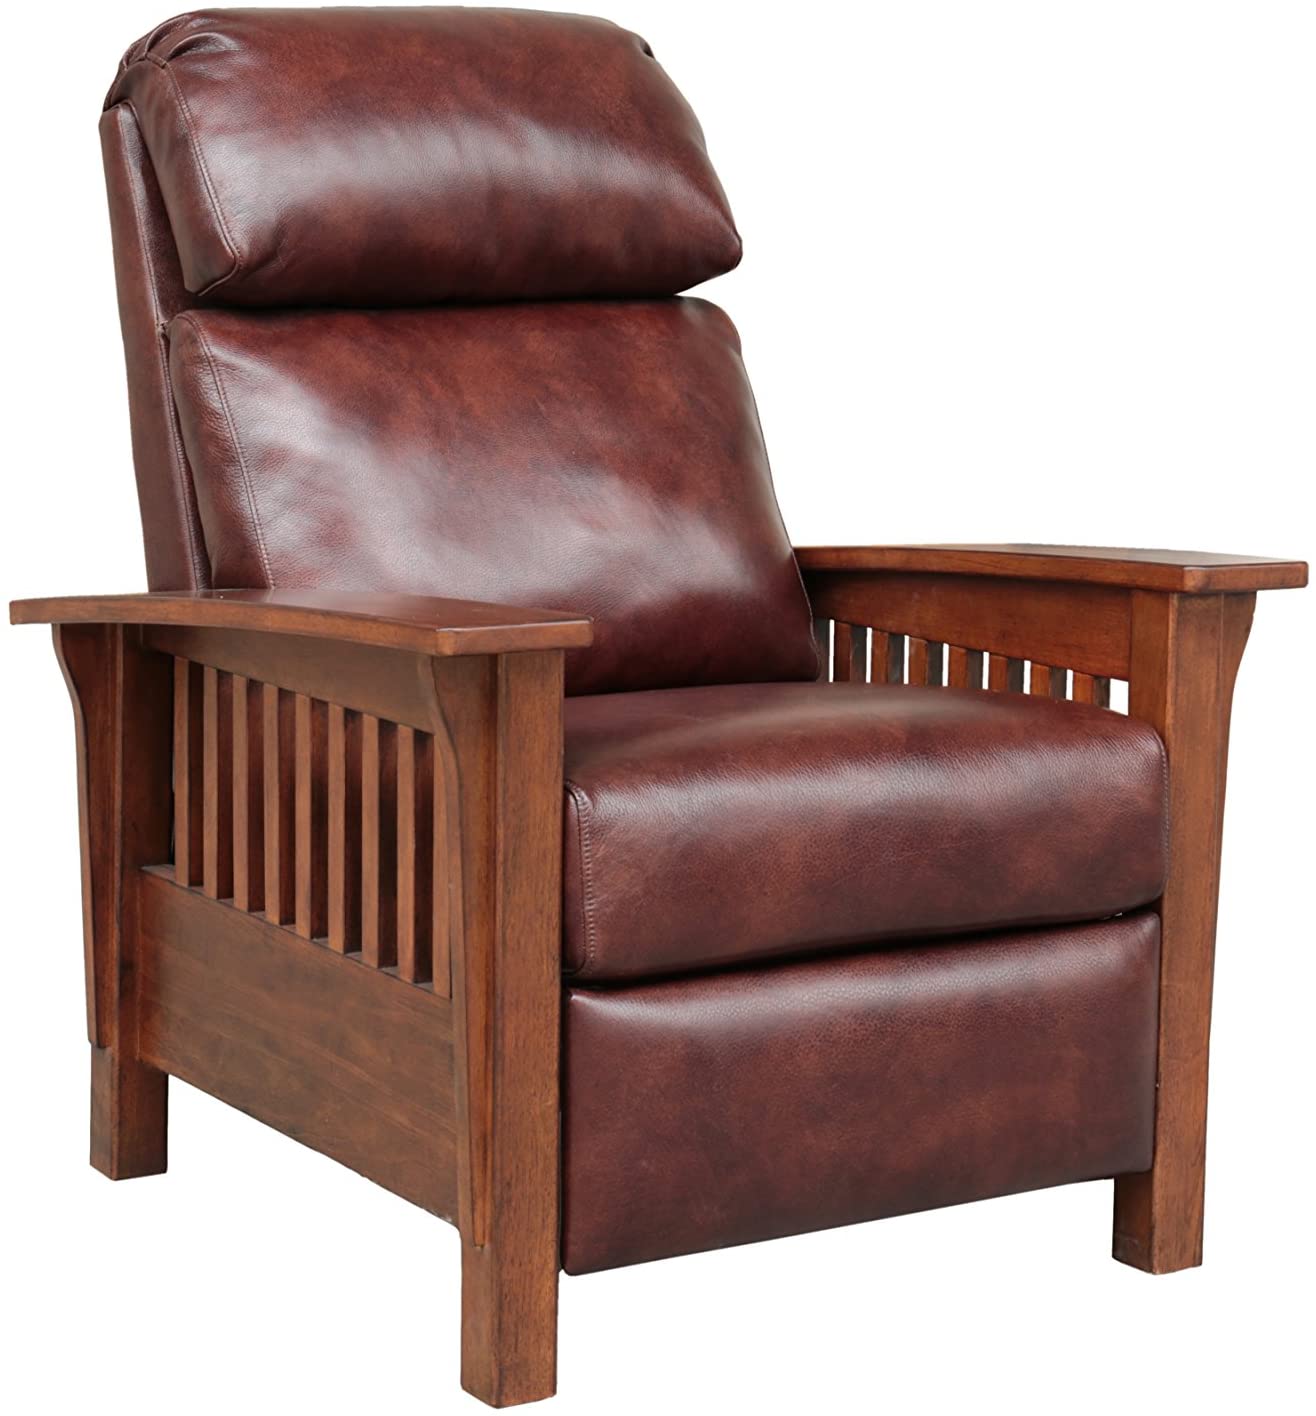 5 Best Mission Style Recliners Dec, Leather And Wood Recliner